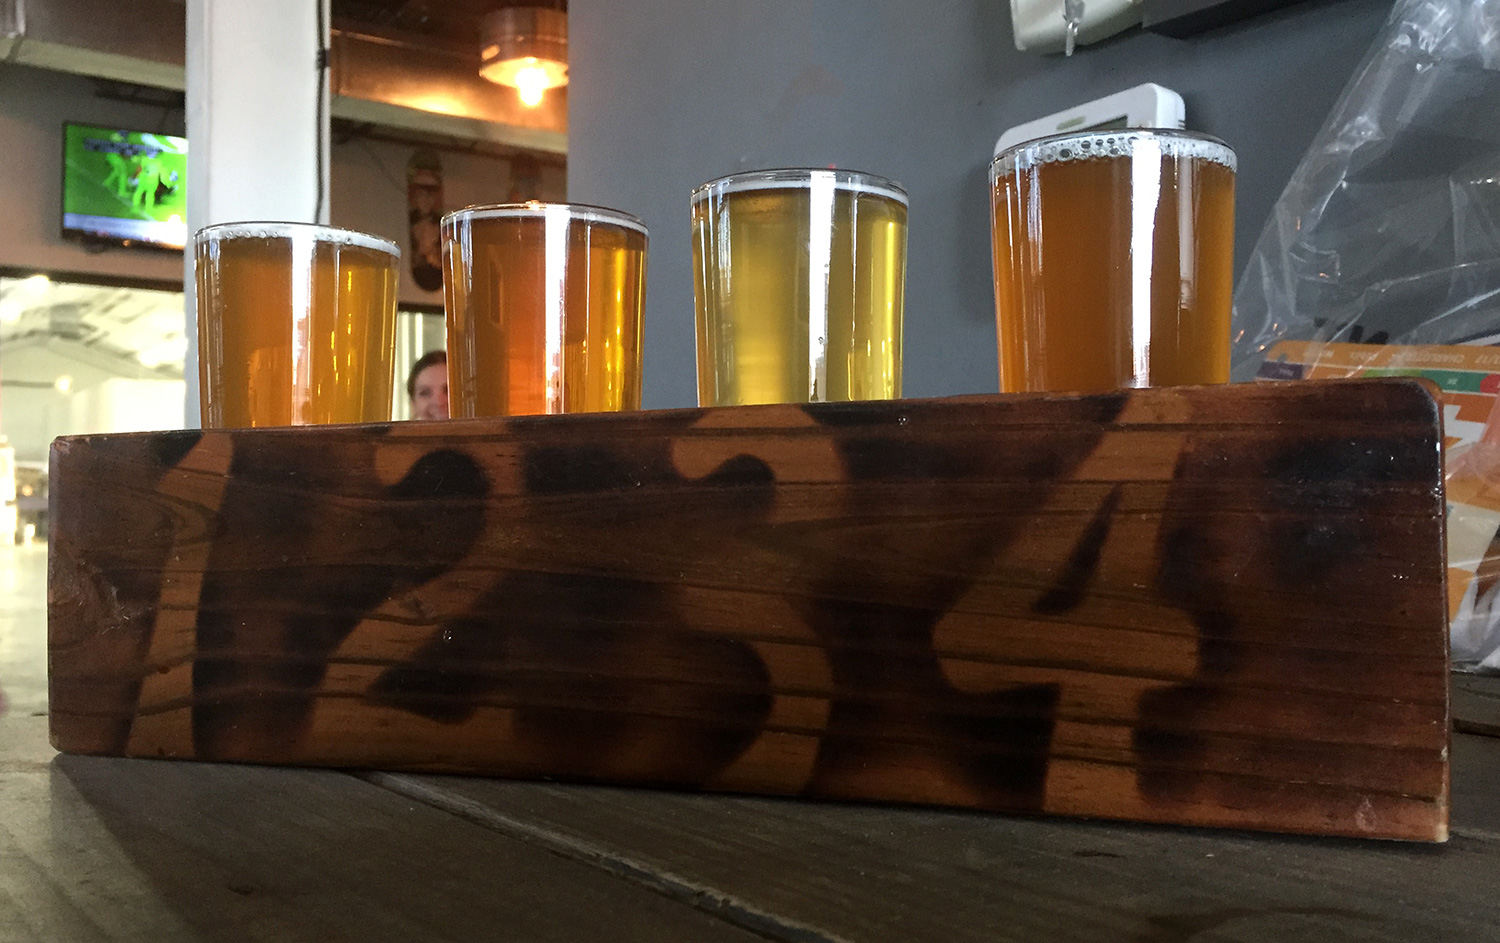 Flight of beer at Unknown Brewing Co.